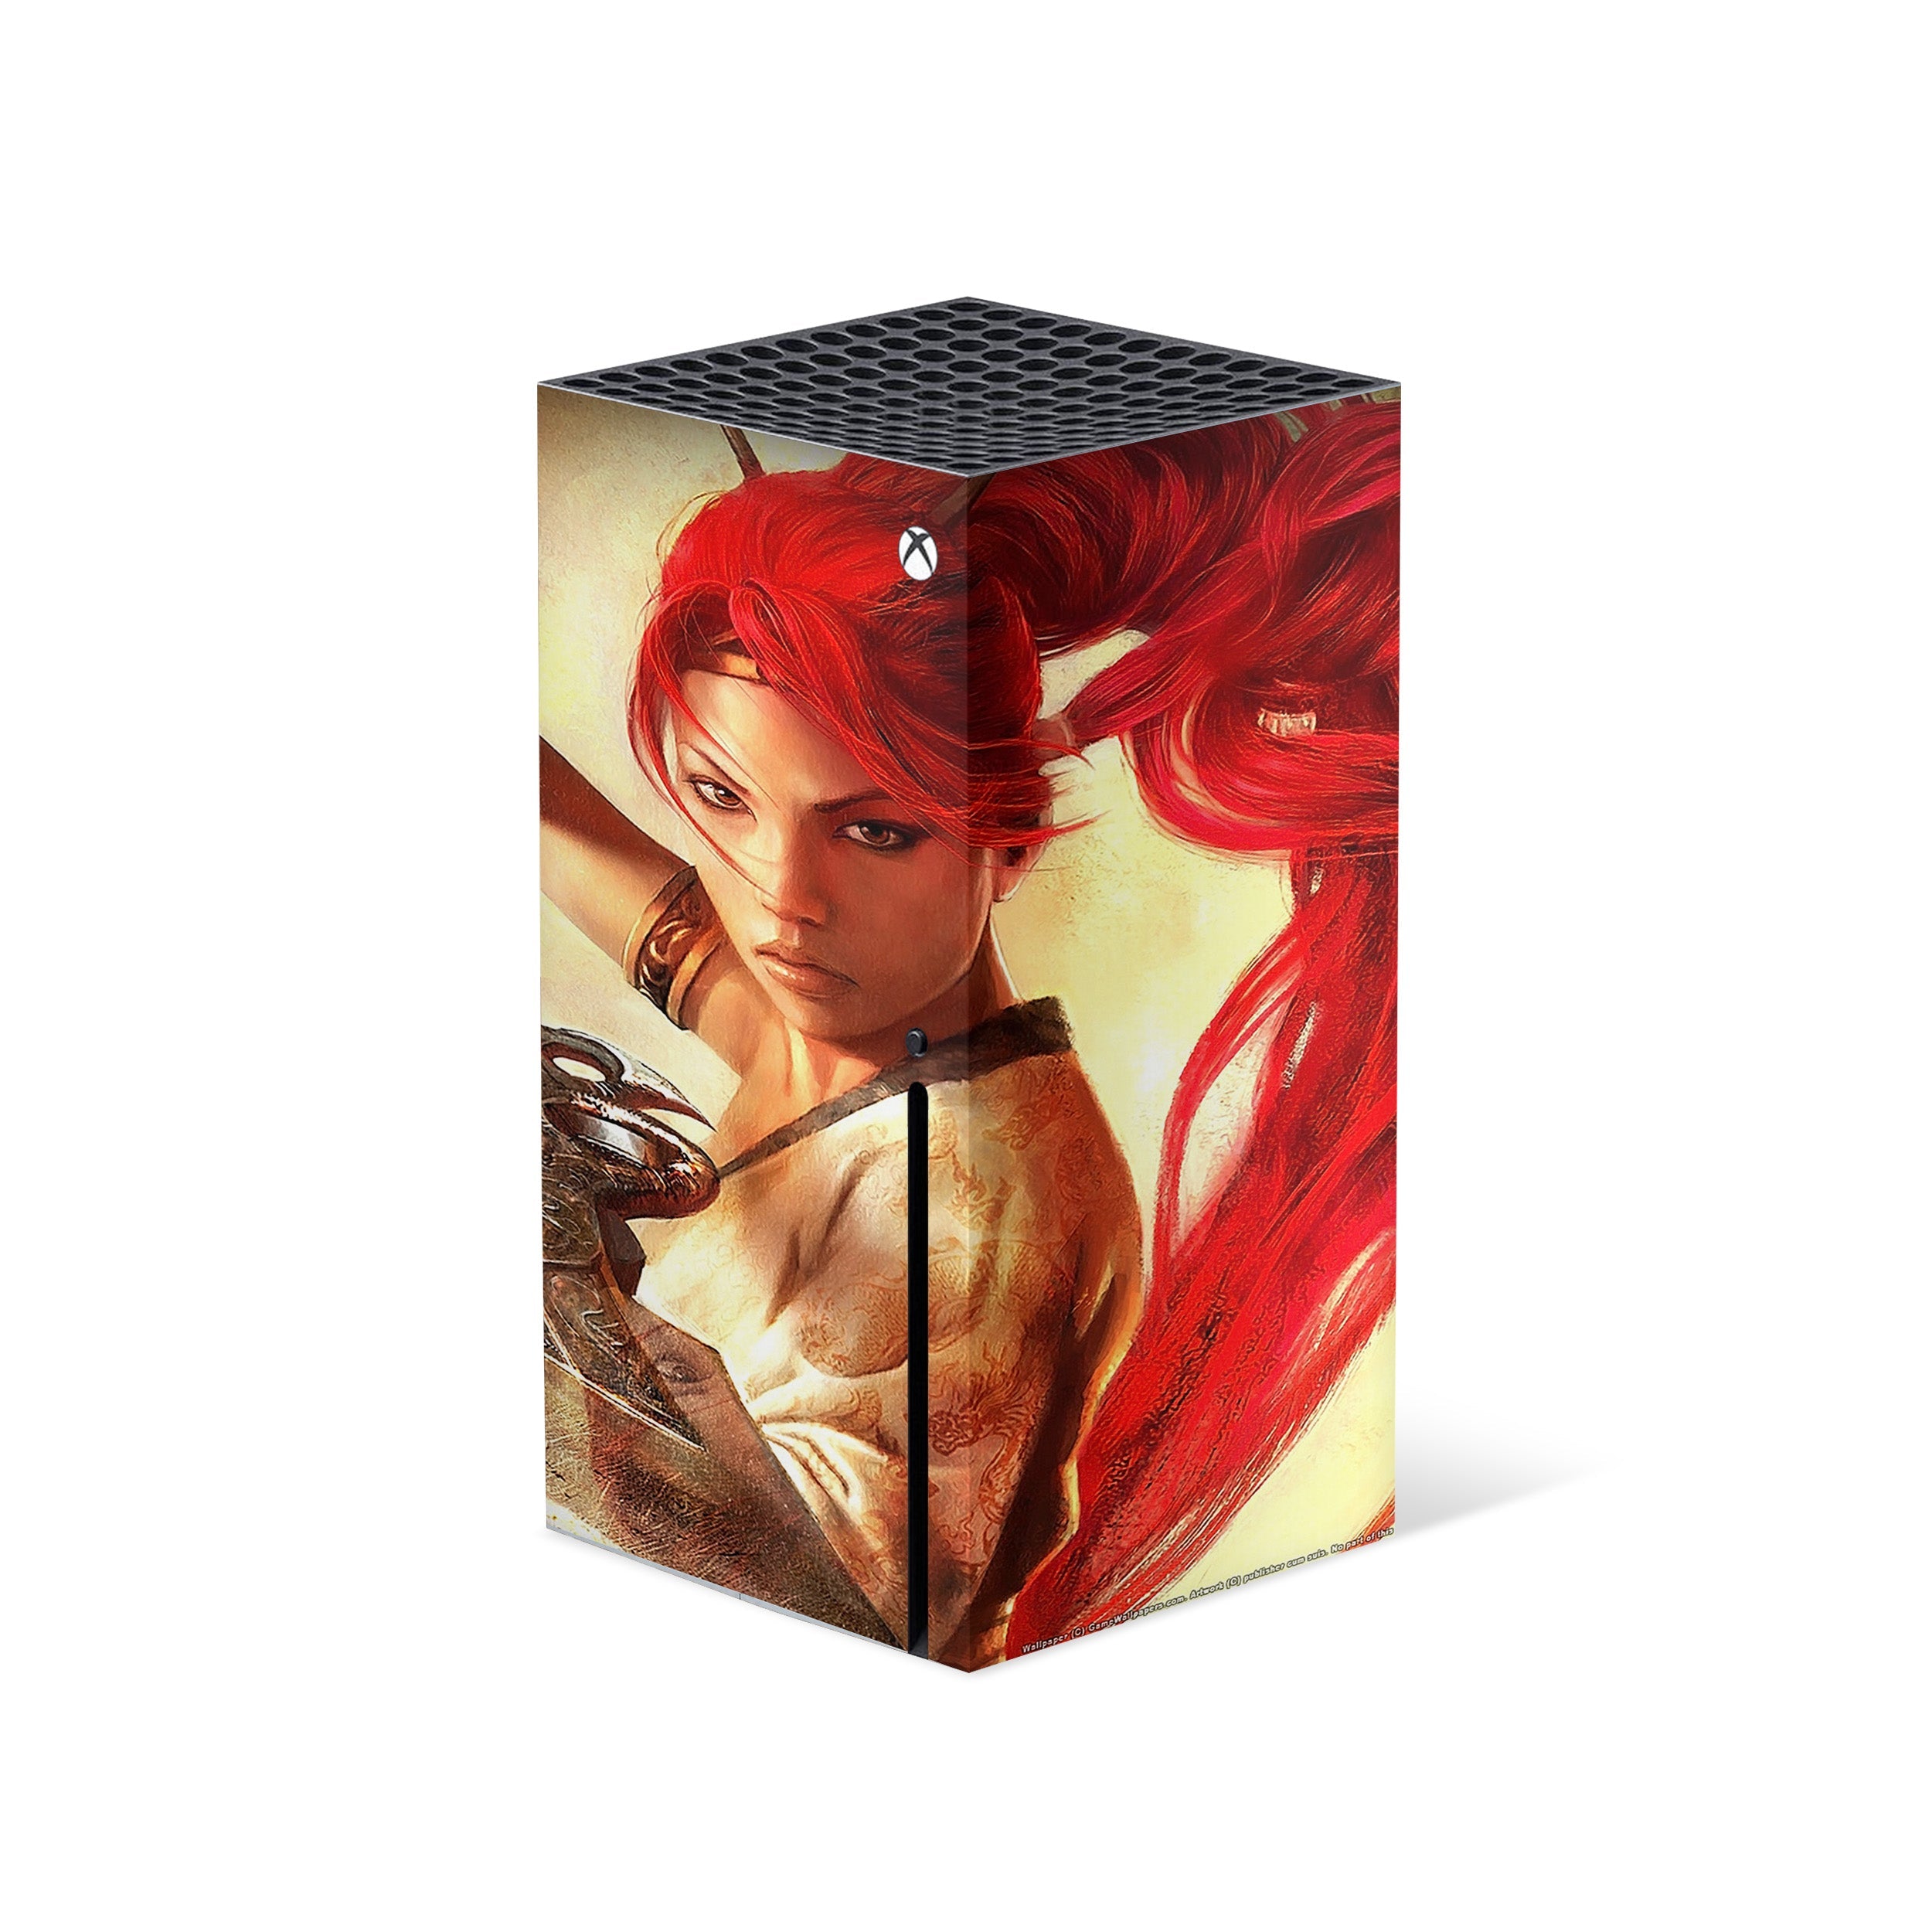 A video game skin featuring a Heavenly Sword design for the Xbox Series X.